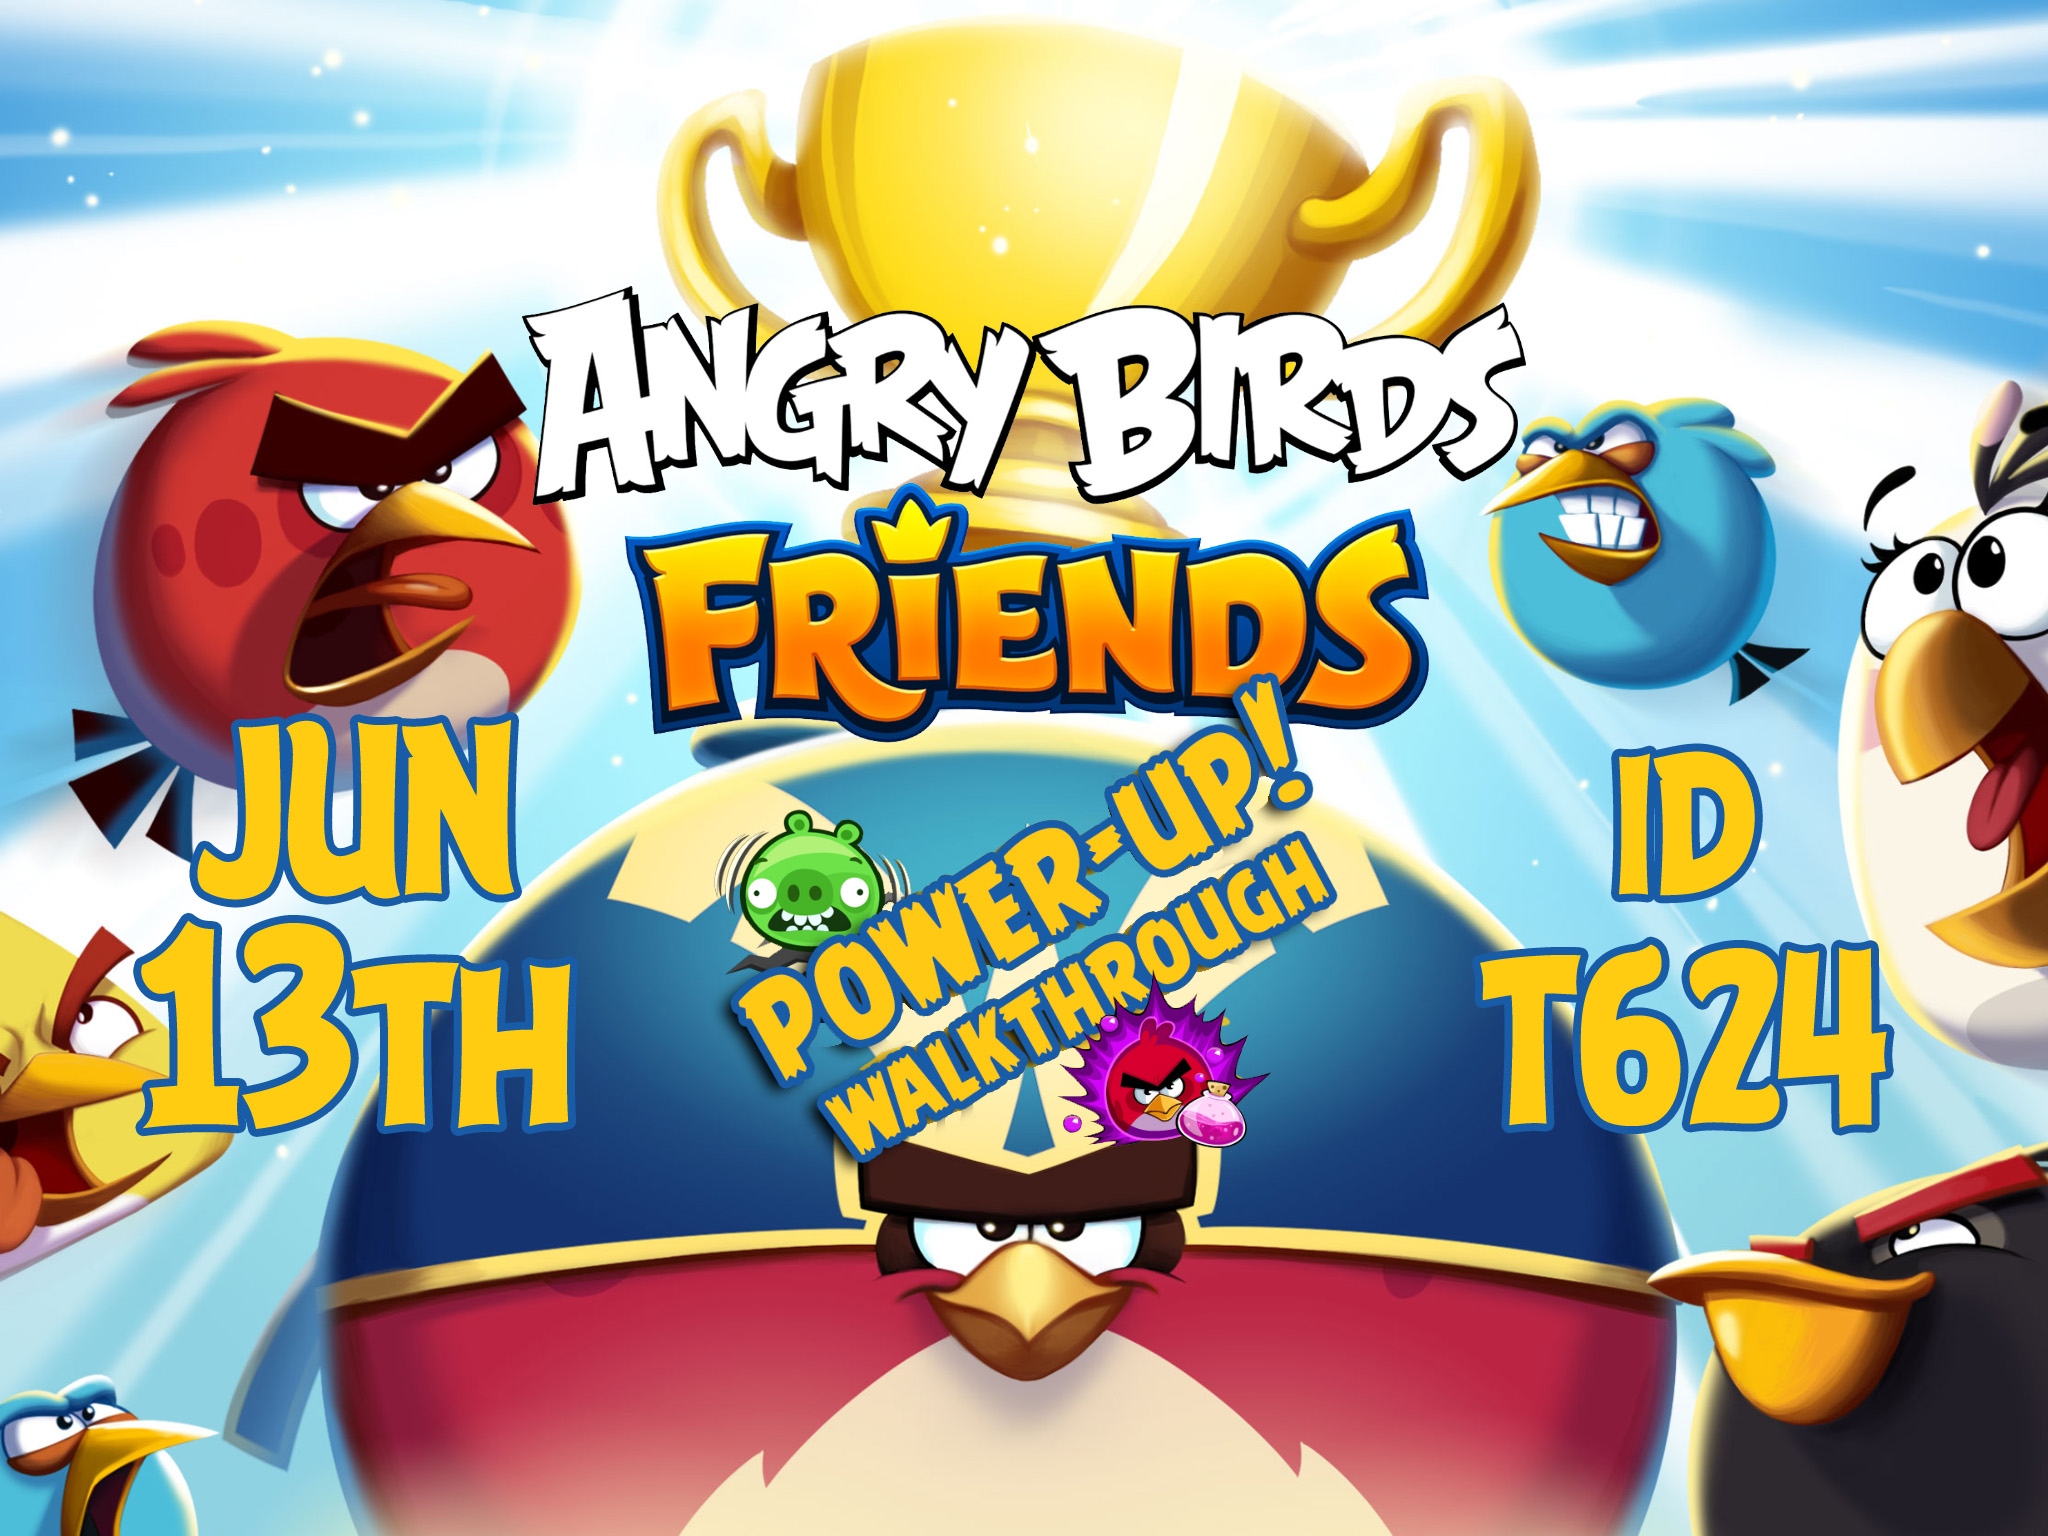 Angry-Birds-Friends-Tournament-T624-Feature-Image-PU